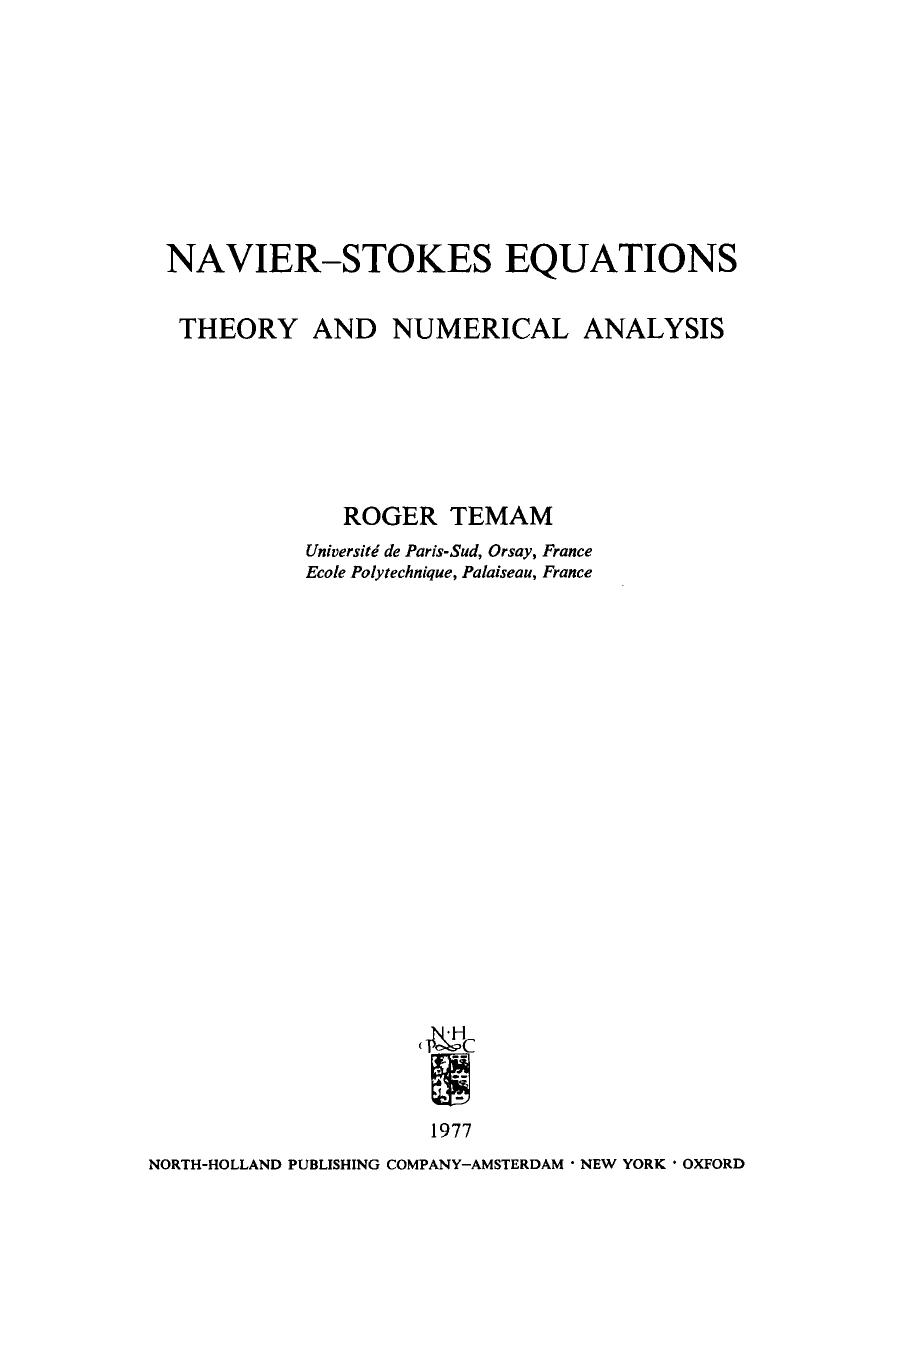 Navier-Stokes Equations: Theory and Numerical Analysis